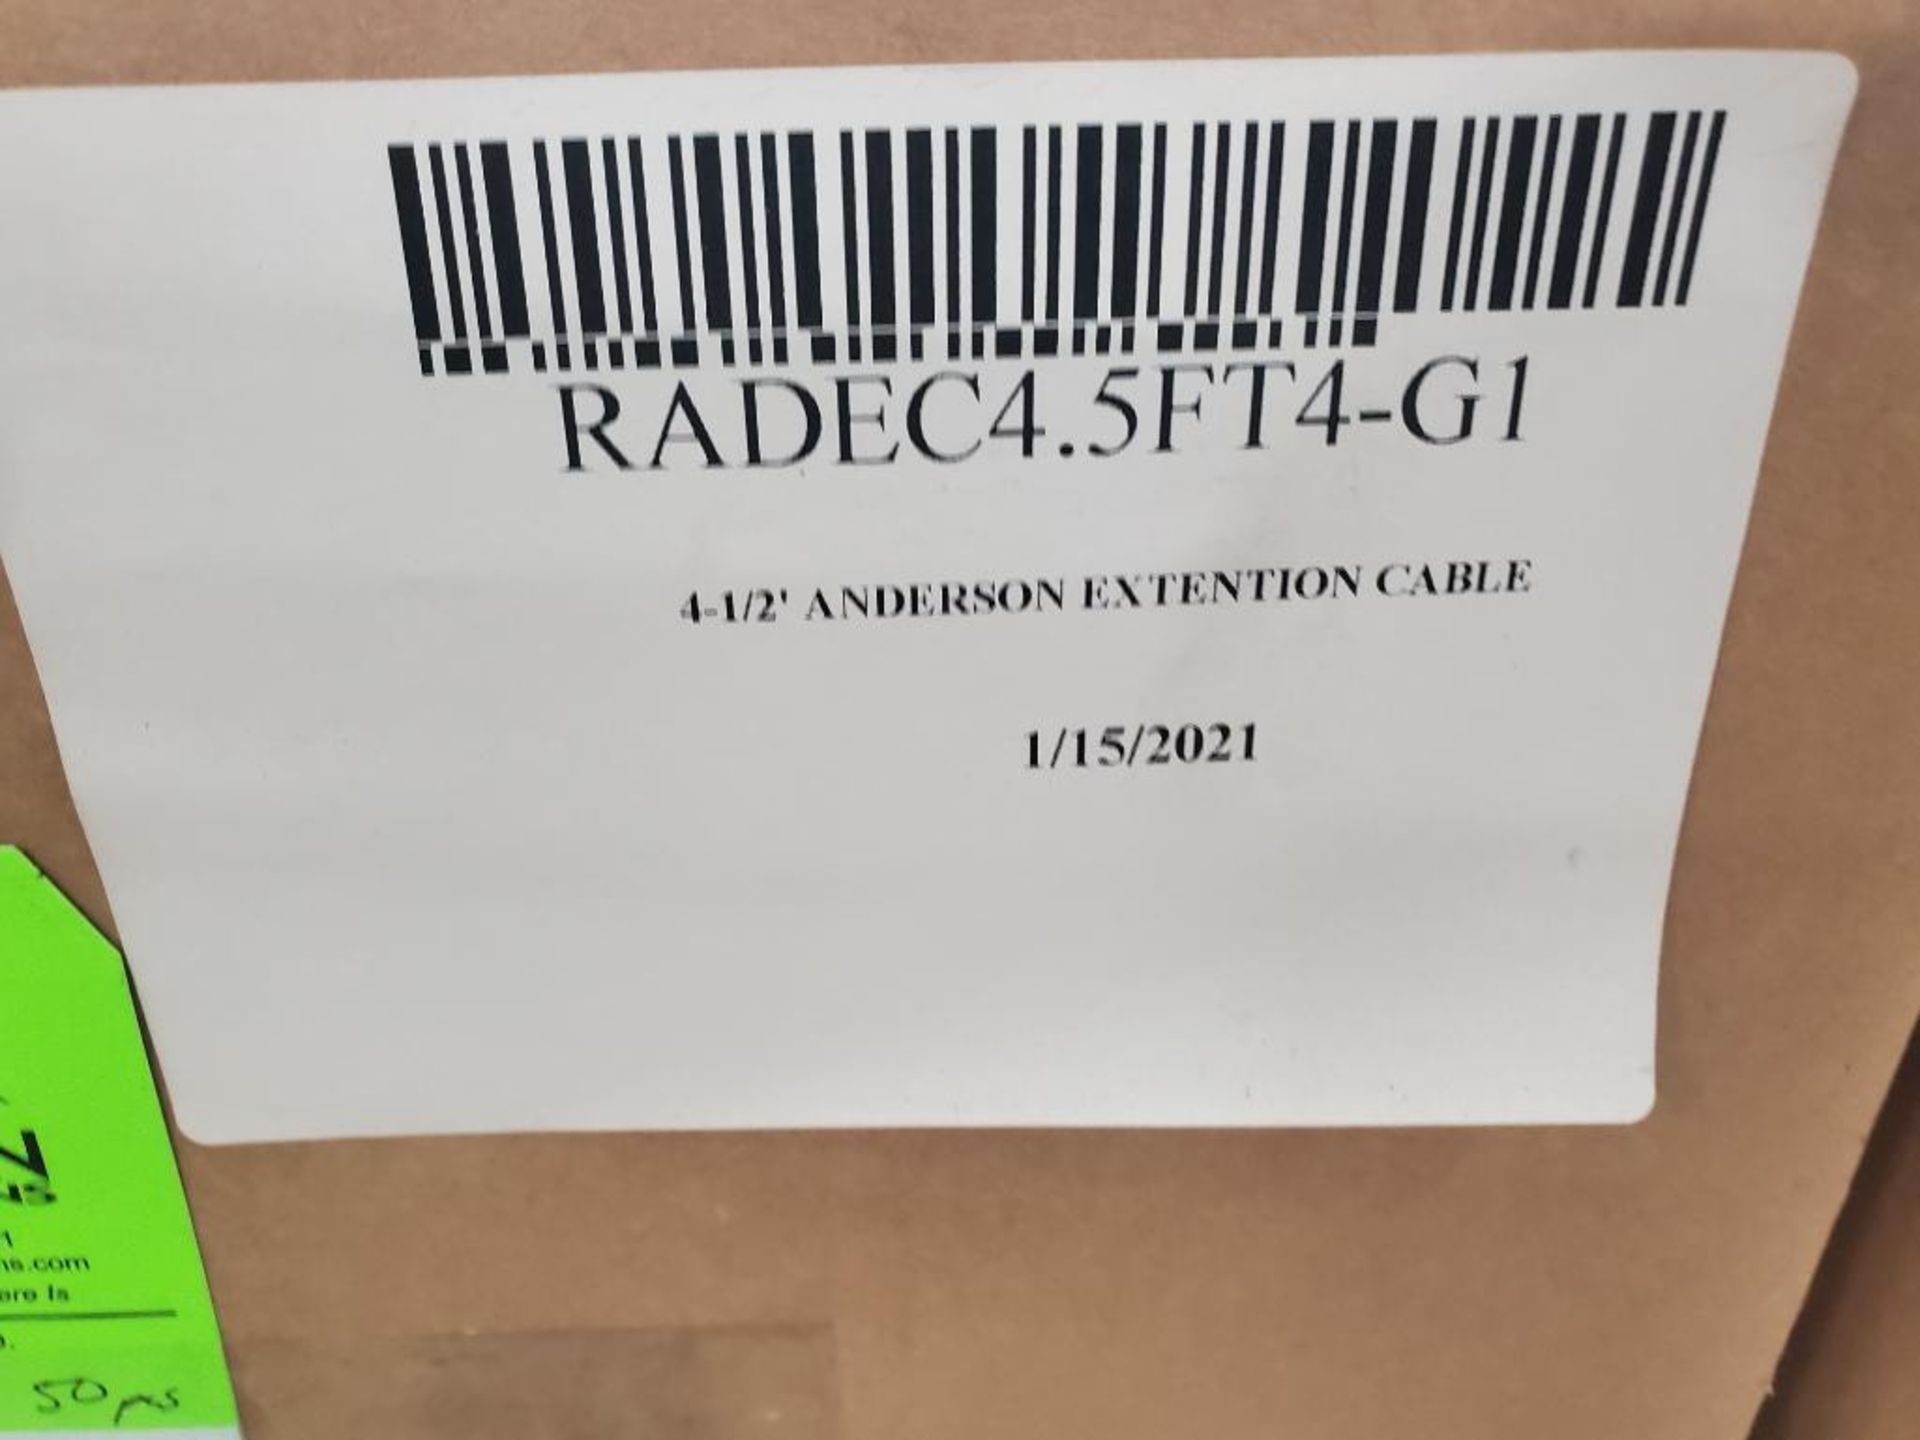 Qty 50 - Anderson 4.5ft battery extension cable. RADEC4.5FT4-G1. 175A, 600V plug. New in box. - Image 3 of 6